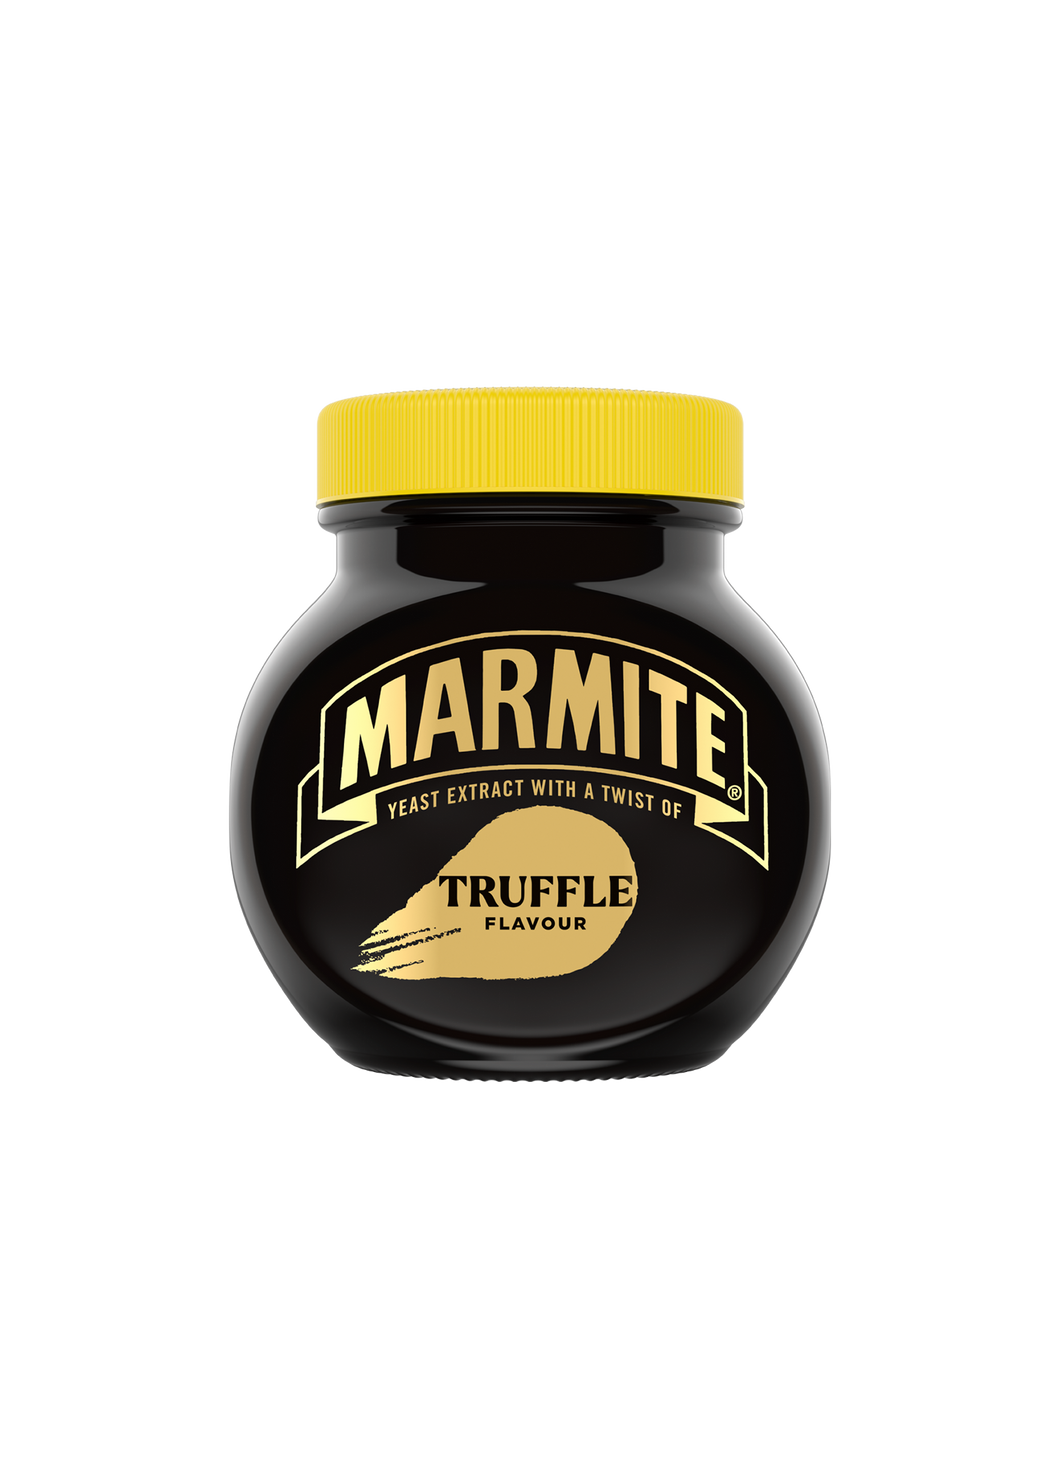 Marmite Yeast Extract Truffle Flavour 250g